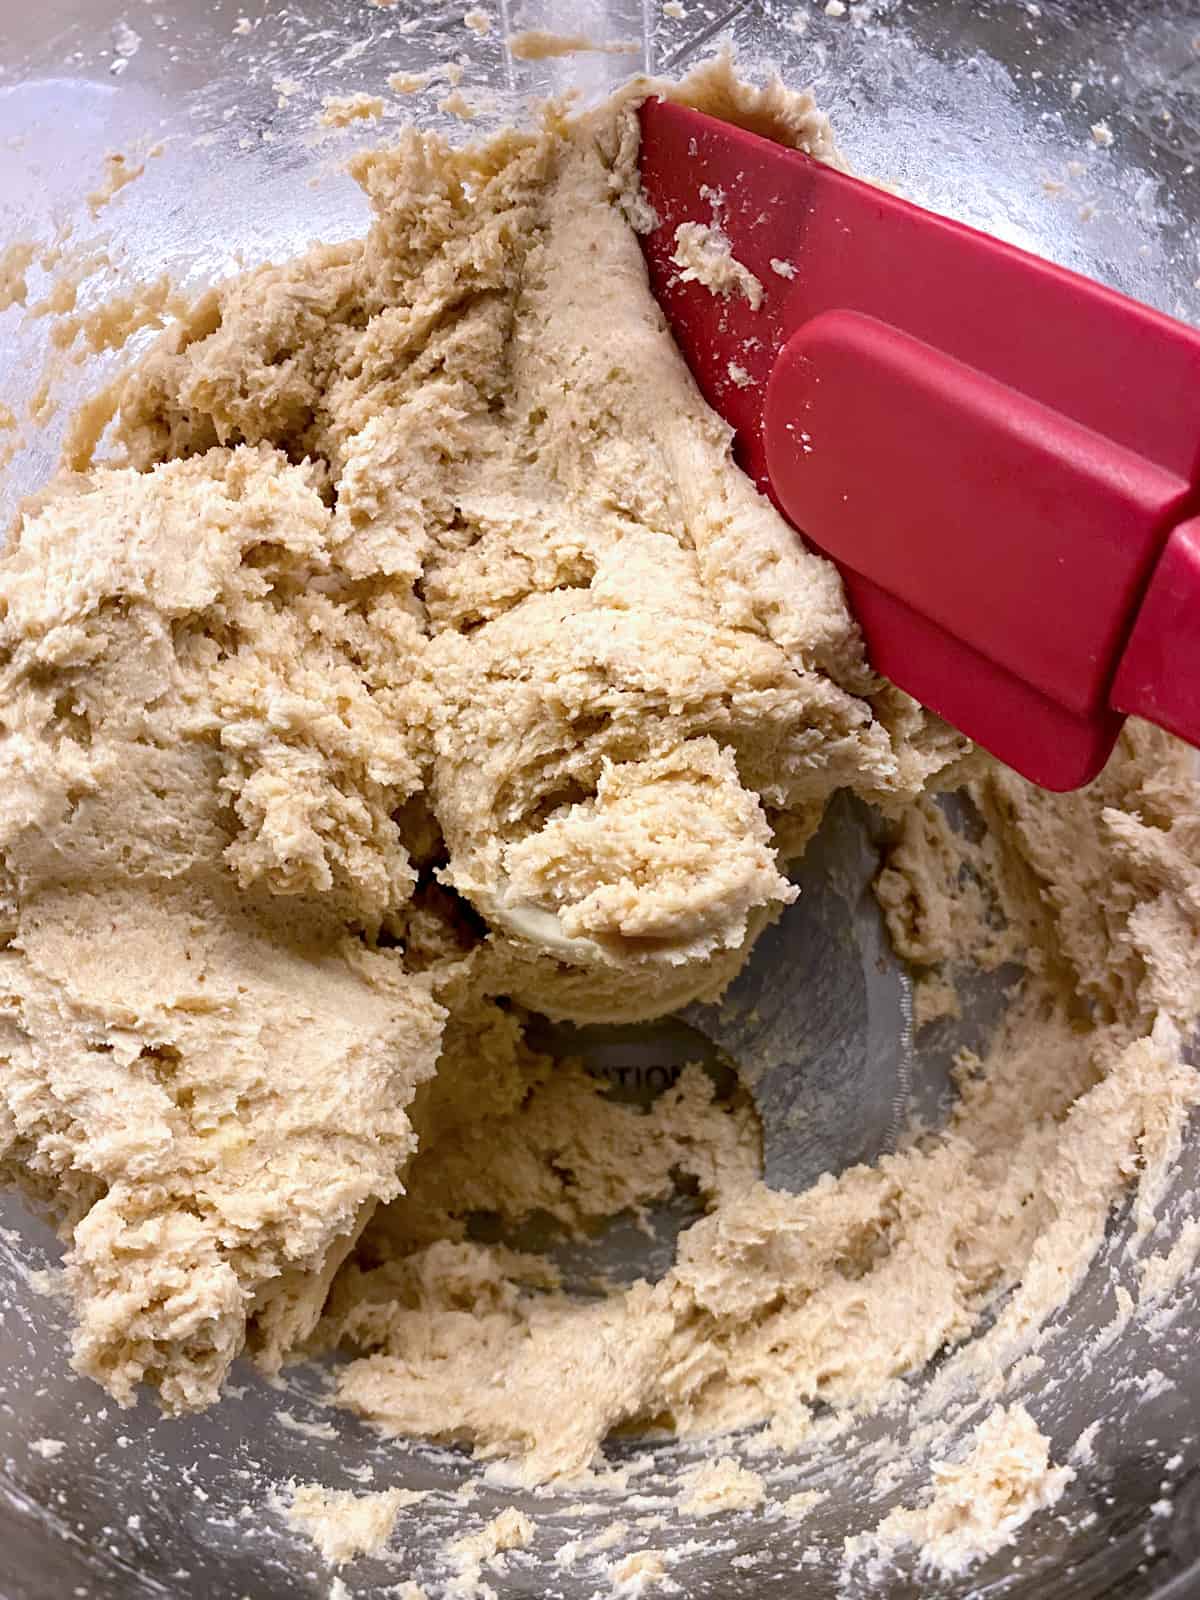 Savory galette dough in a food processor and a red spatula.